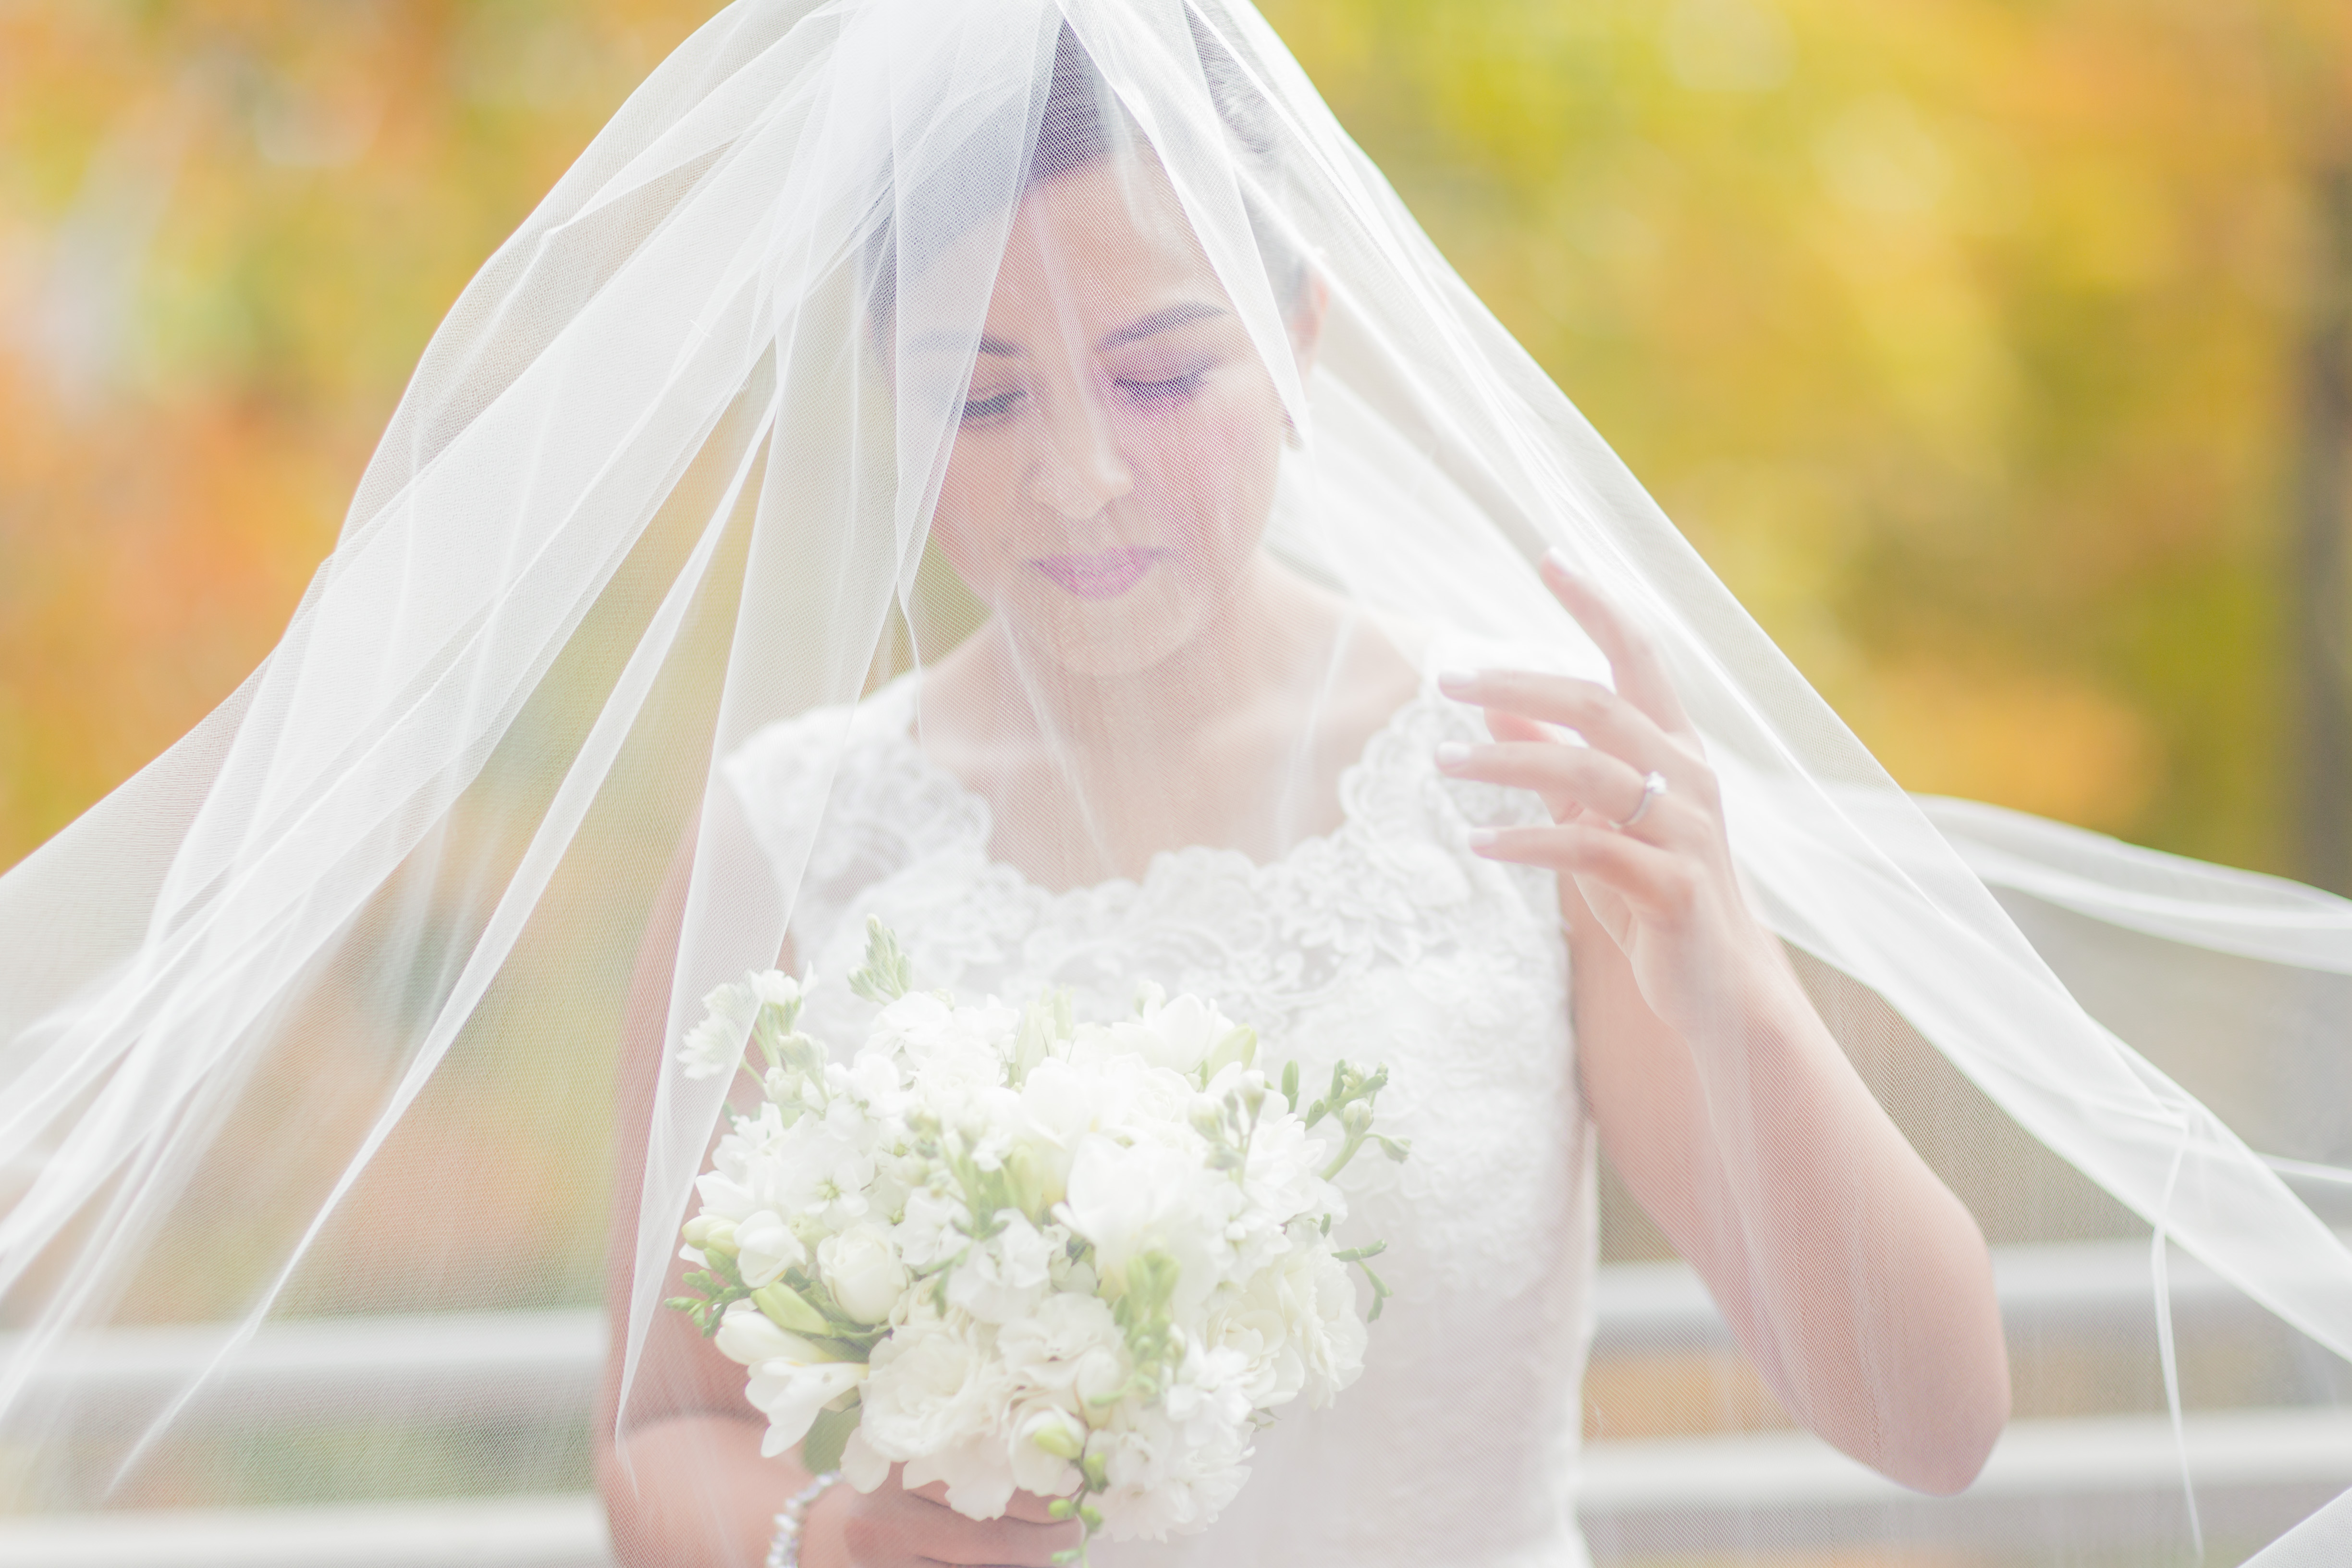 How to find your perfect wedding gown